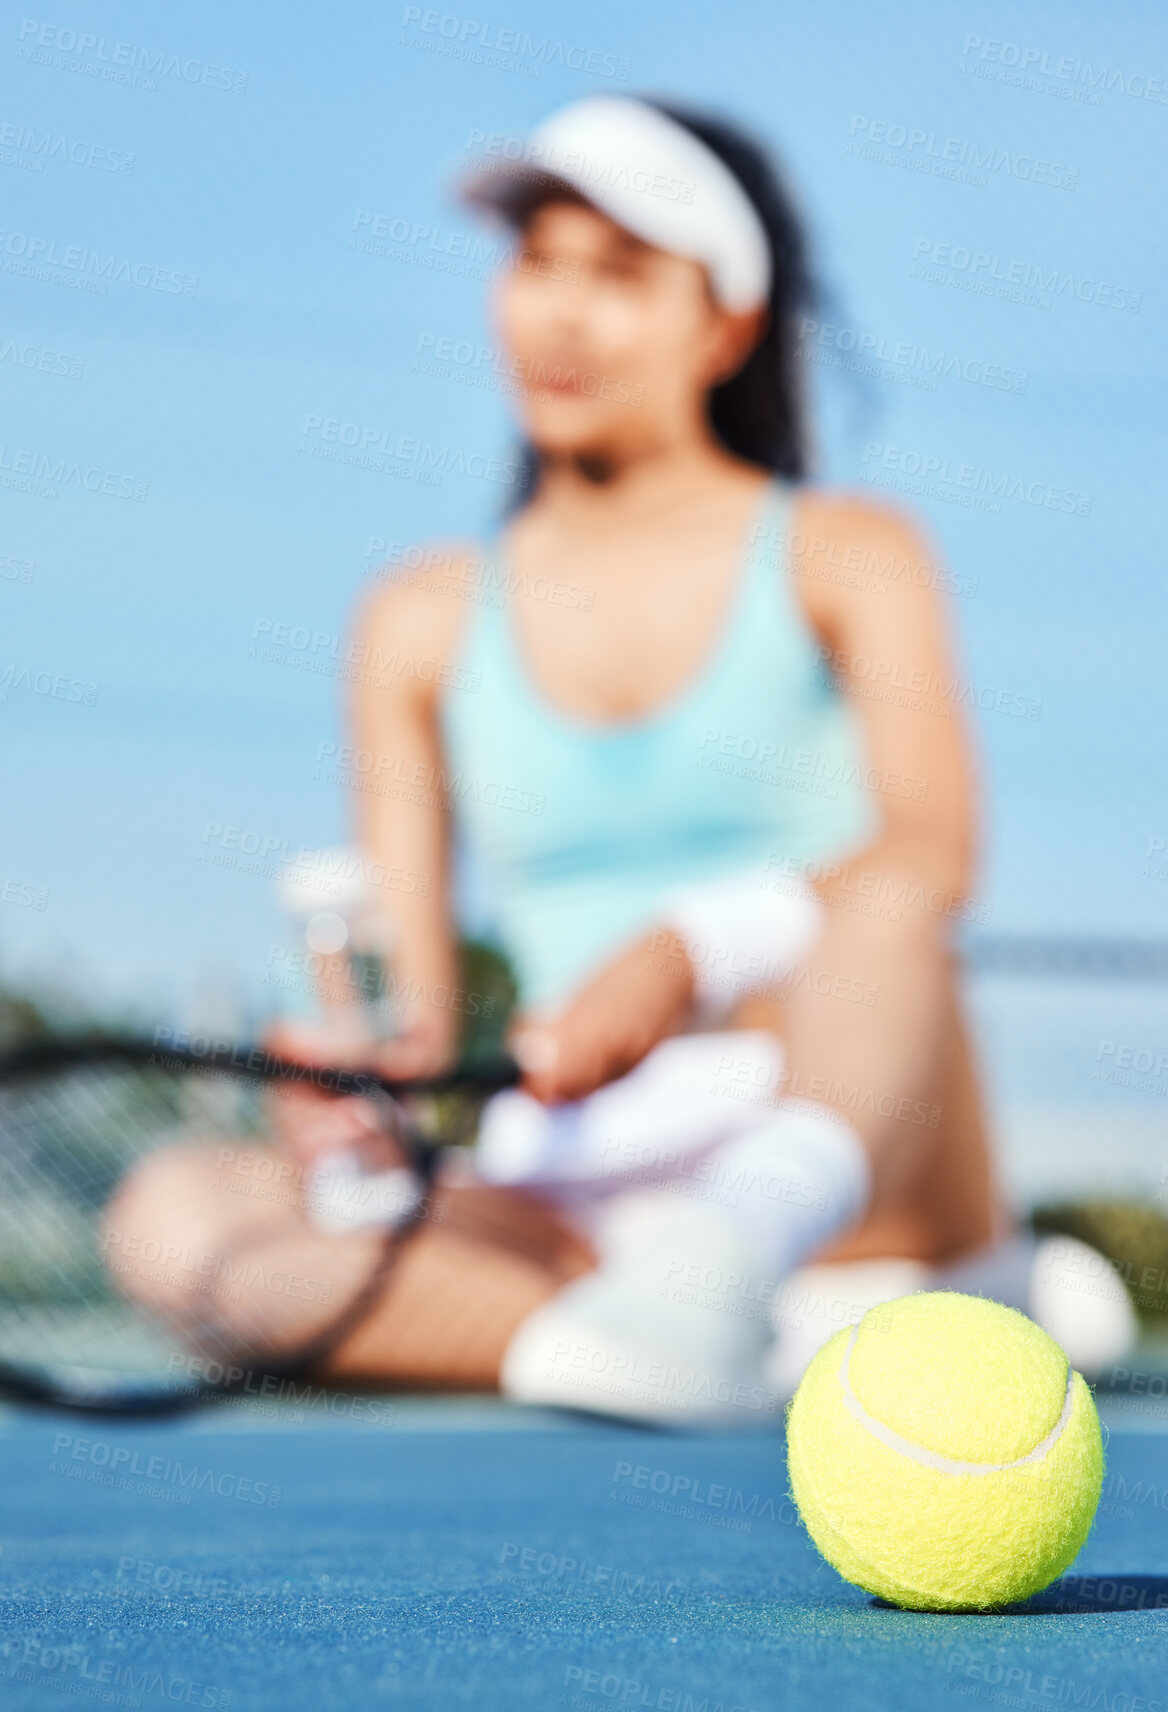 Buy stock photo Full length shot of an unrecognisable woman sitting alone during tennis practice